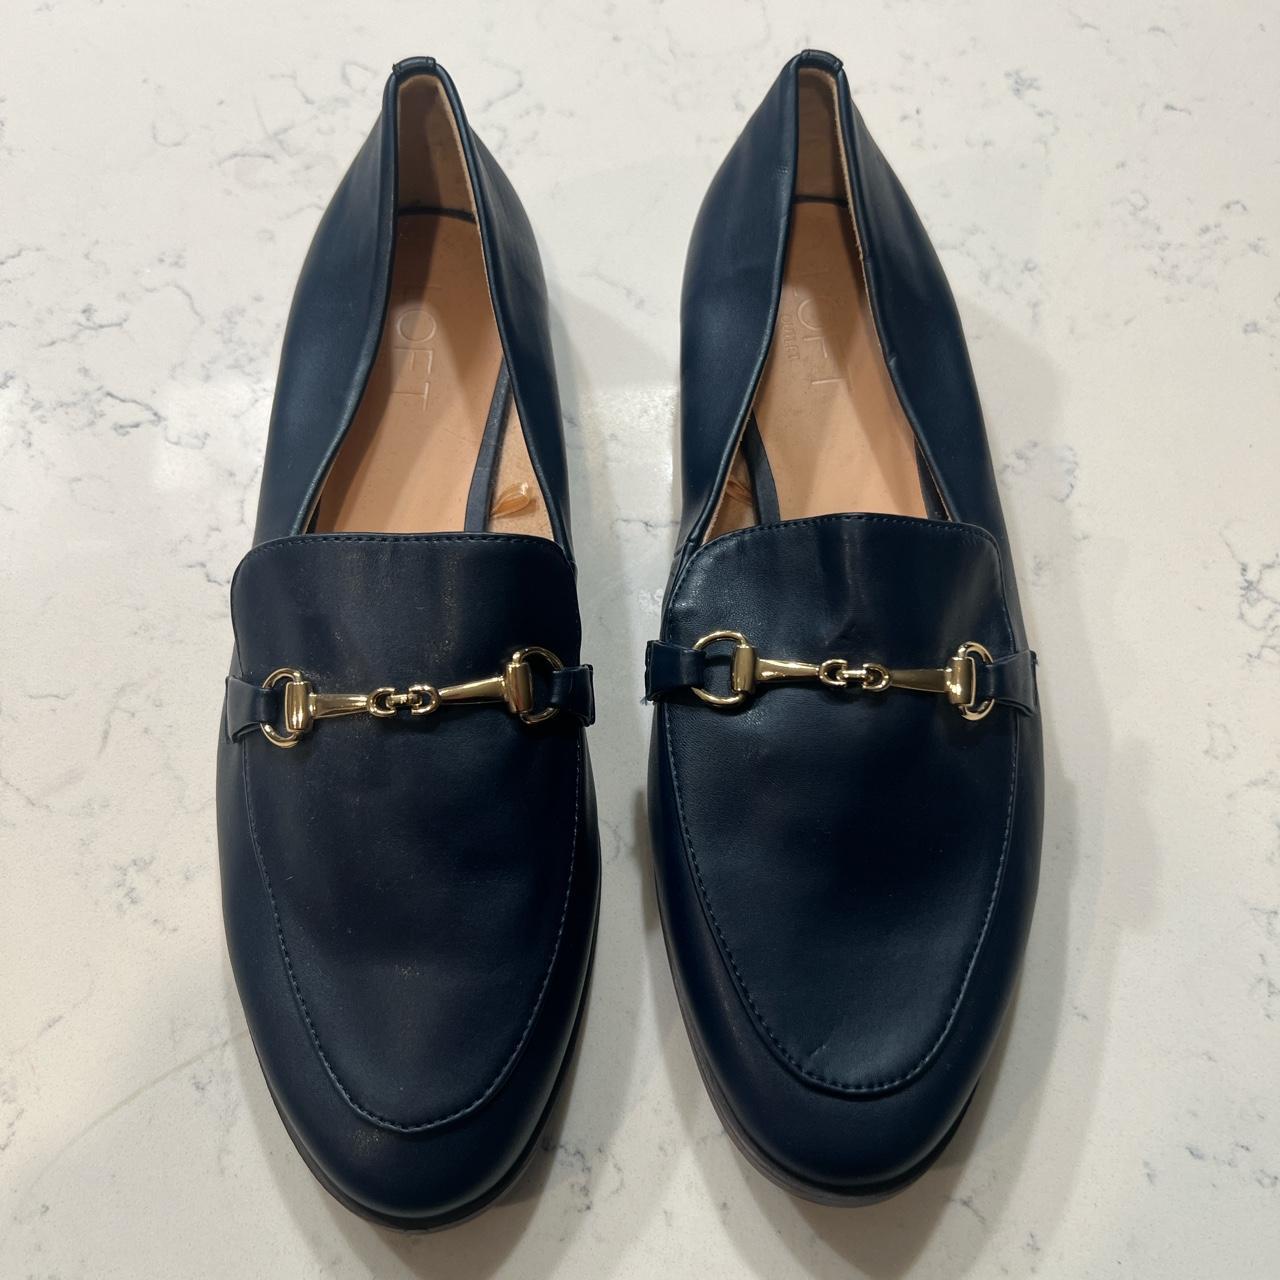 Navy loafers with gold buckle - never worn but a... - Depop